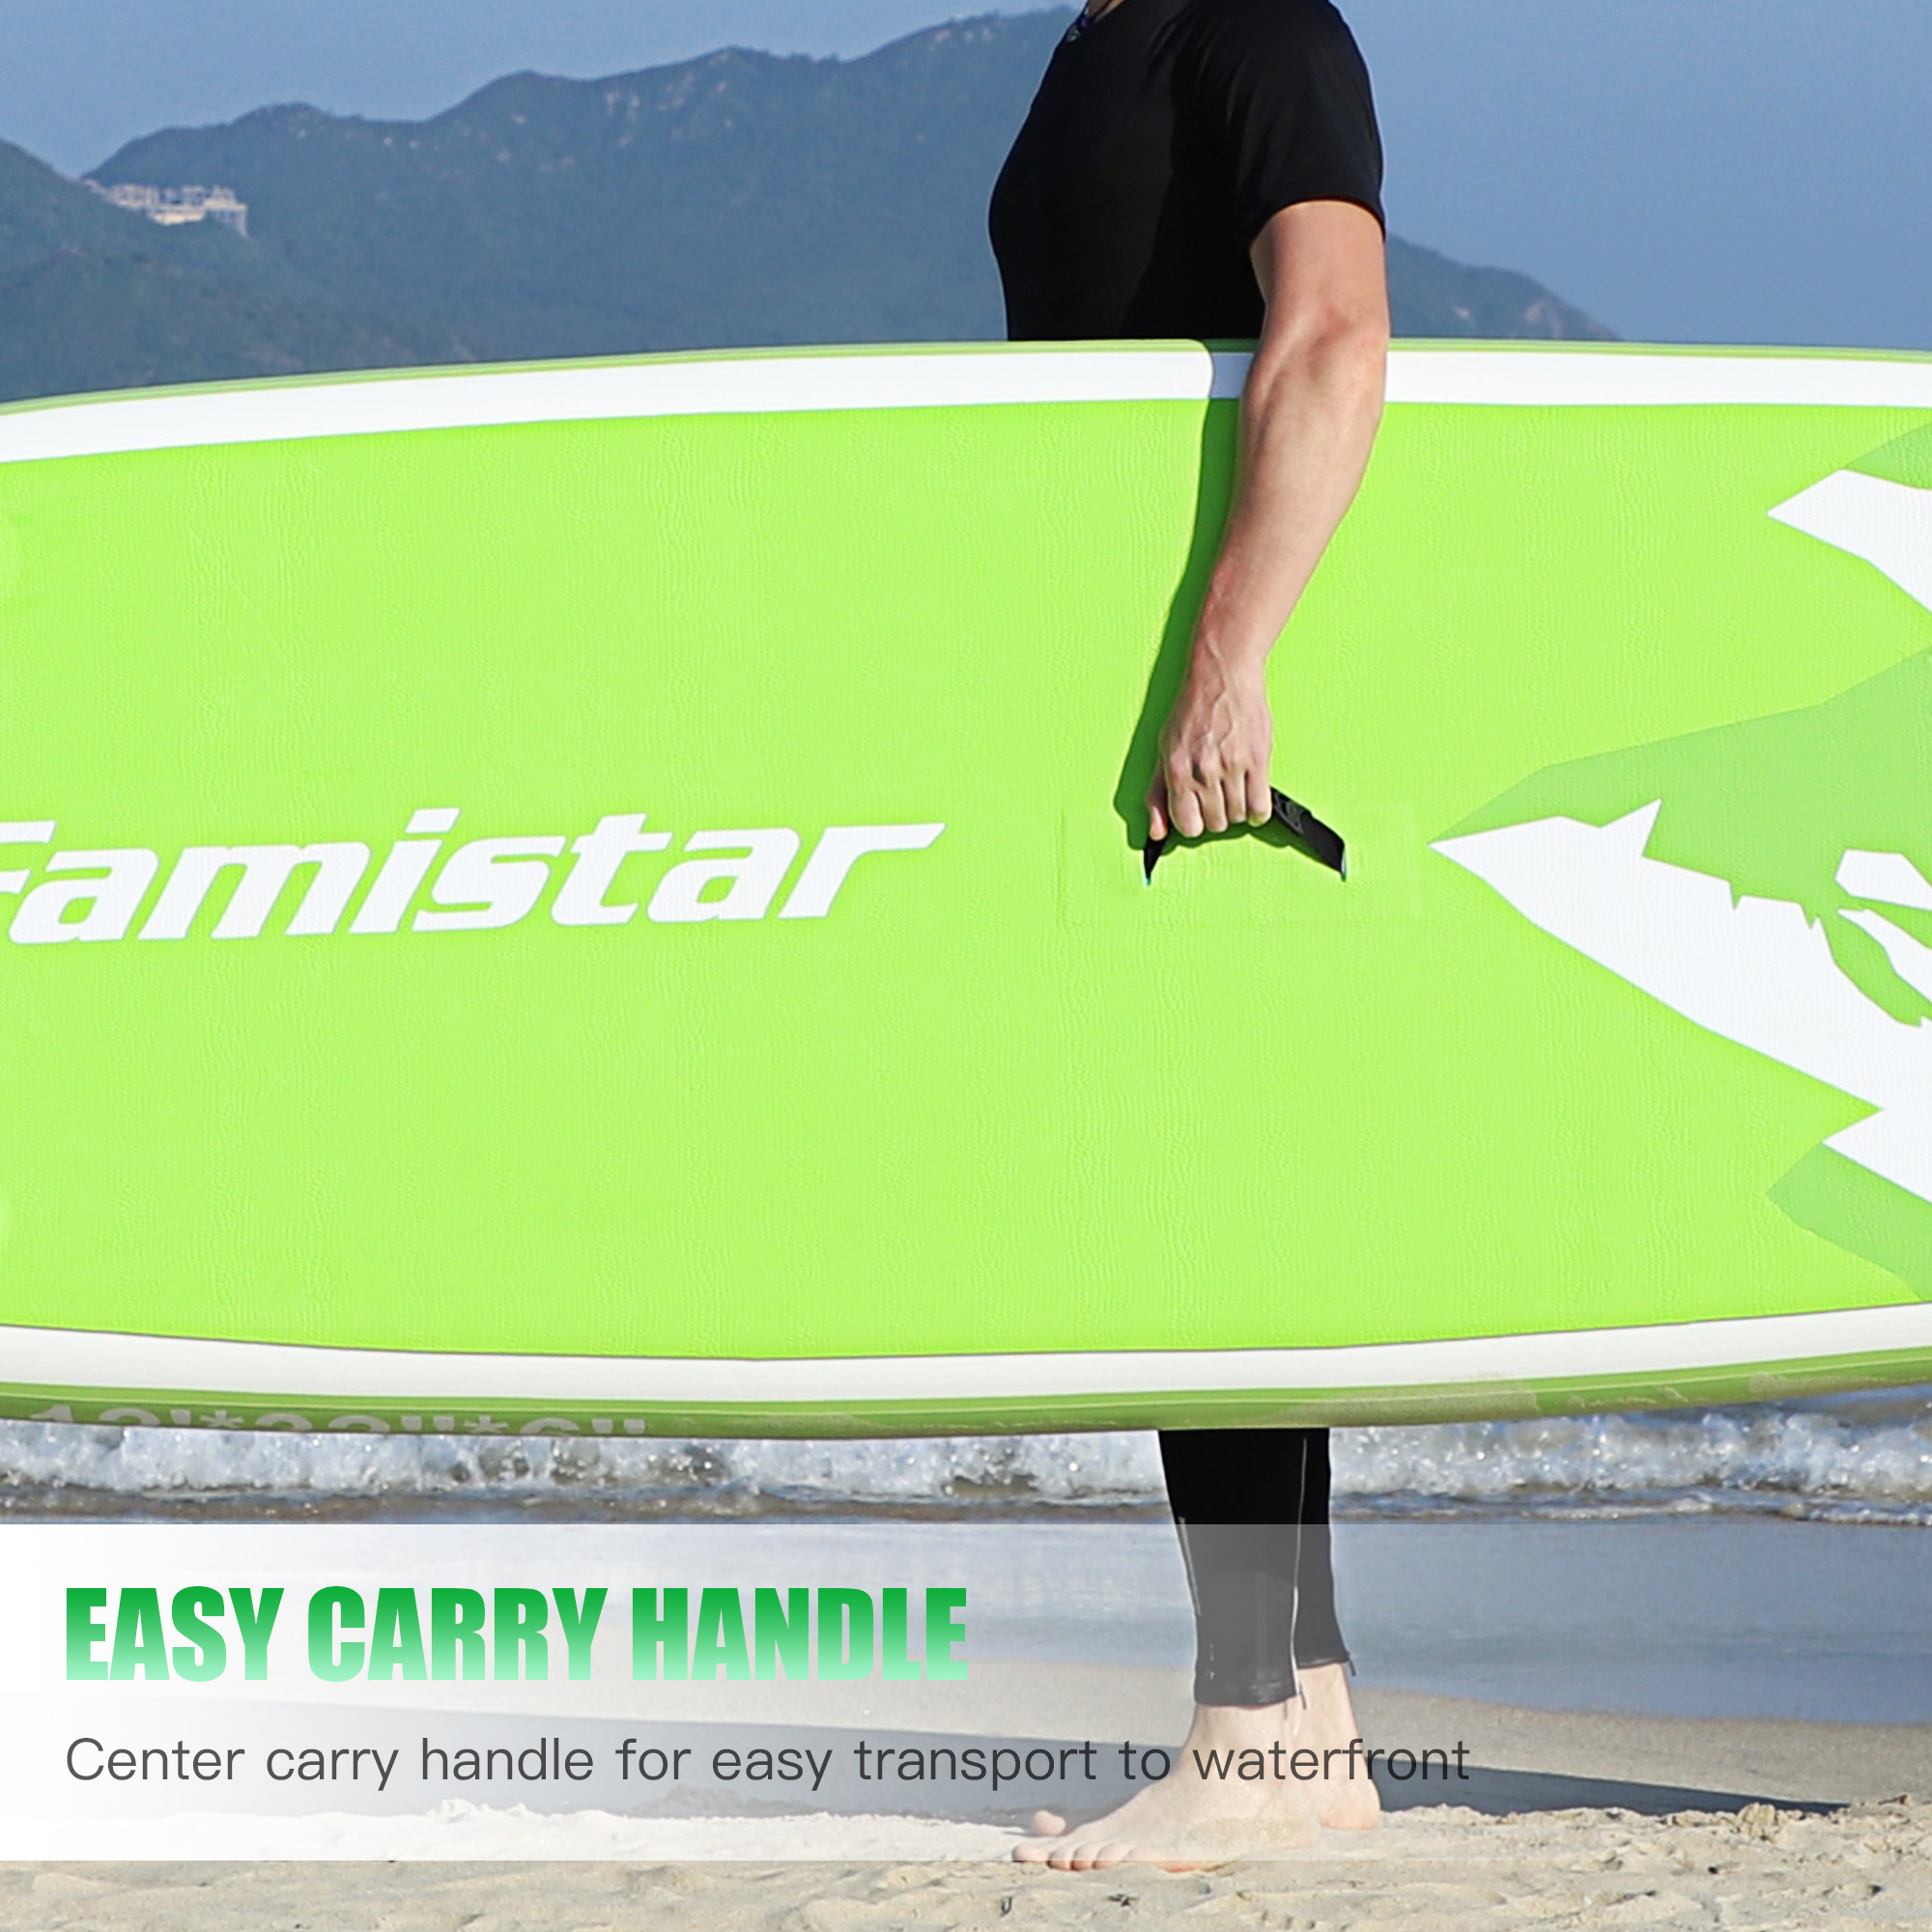 Famistar 8'7" Inflatable Stand Up Paddle Board SUP w/ 3 Fins, Adjustable Paddle, Pump & Carrying Backpack - image 5 of 13